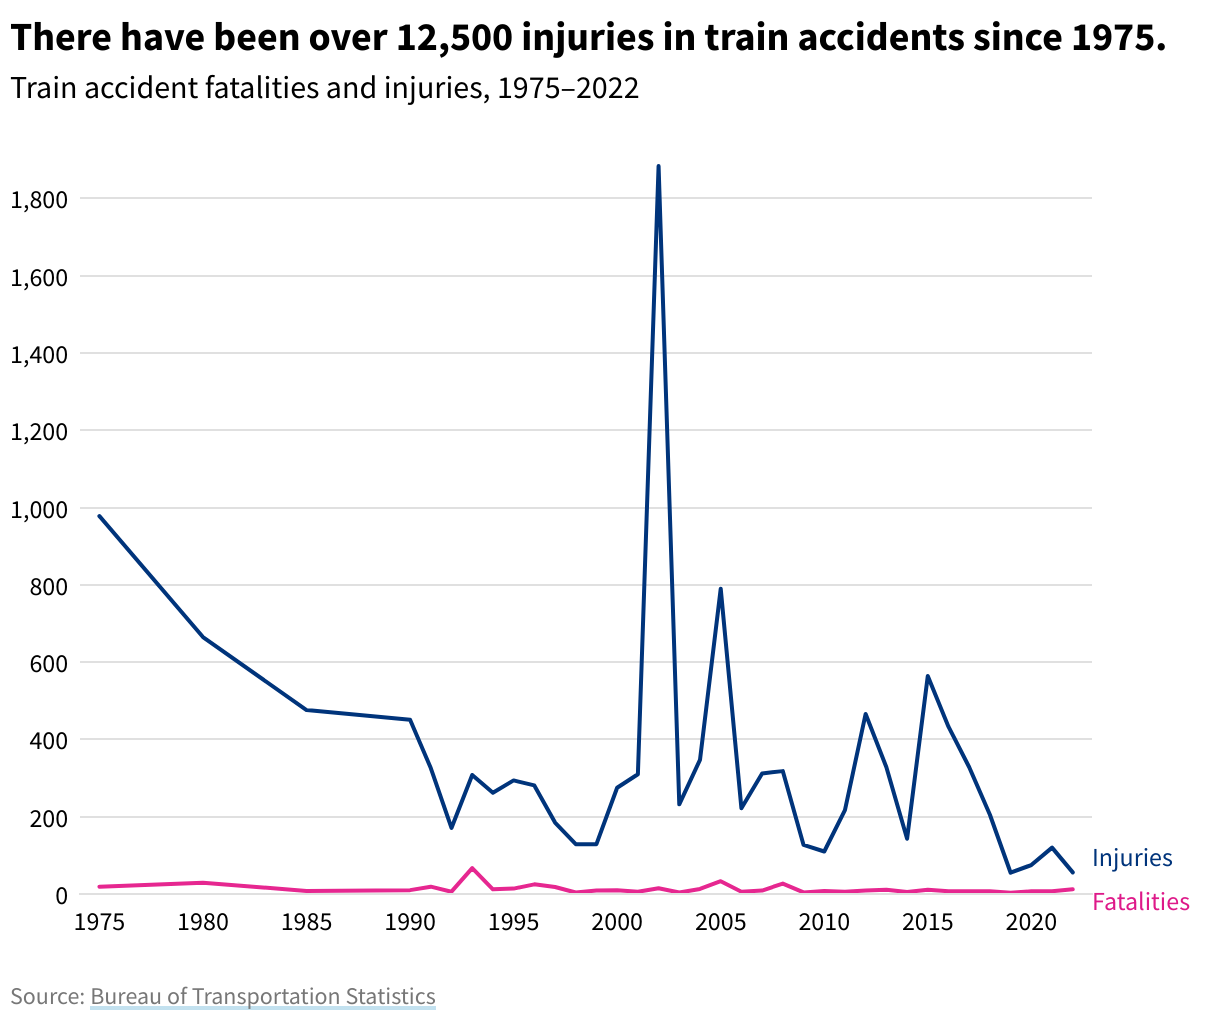 Line chart showing train accident deaths and injuries from 1975 to 2022. In 2022, there were 56 injuries and 12 deaths.